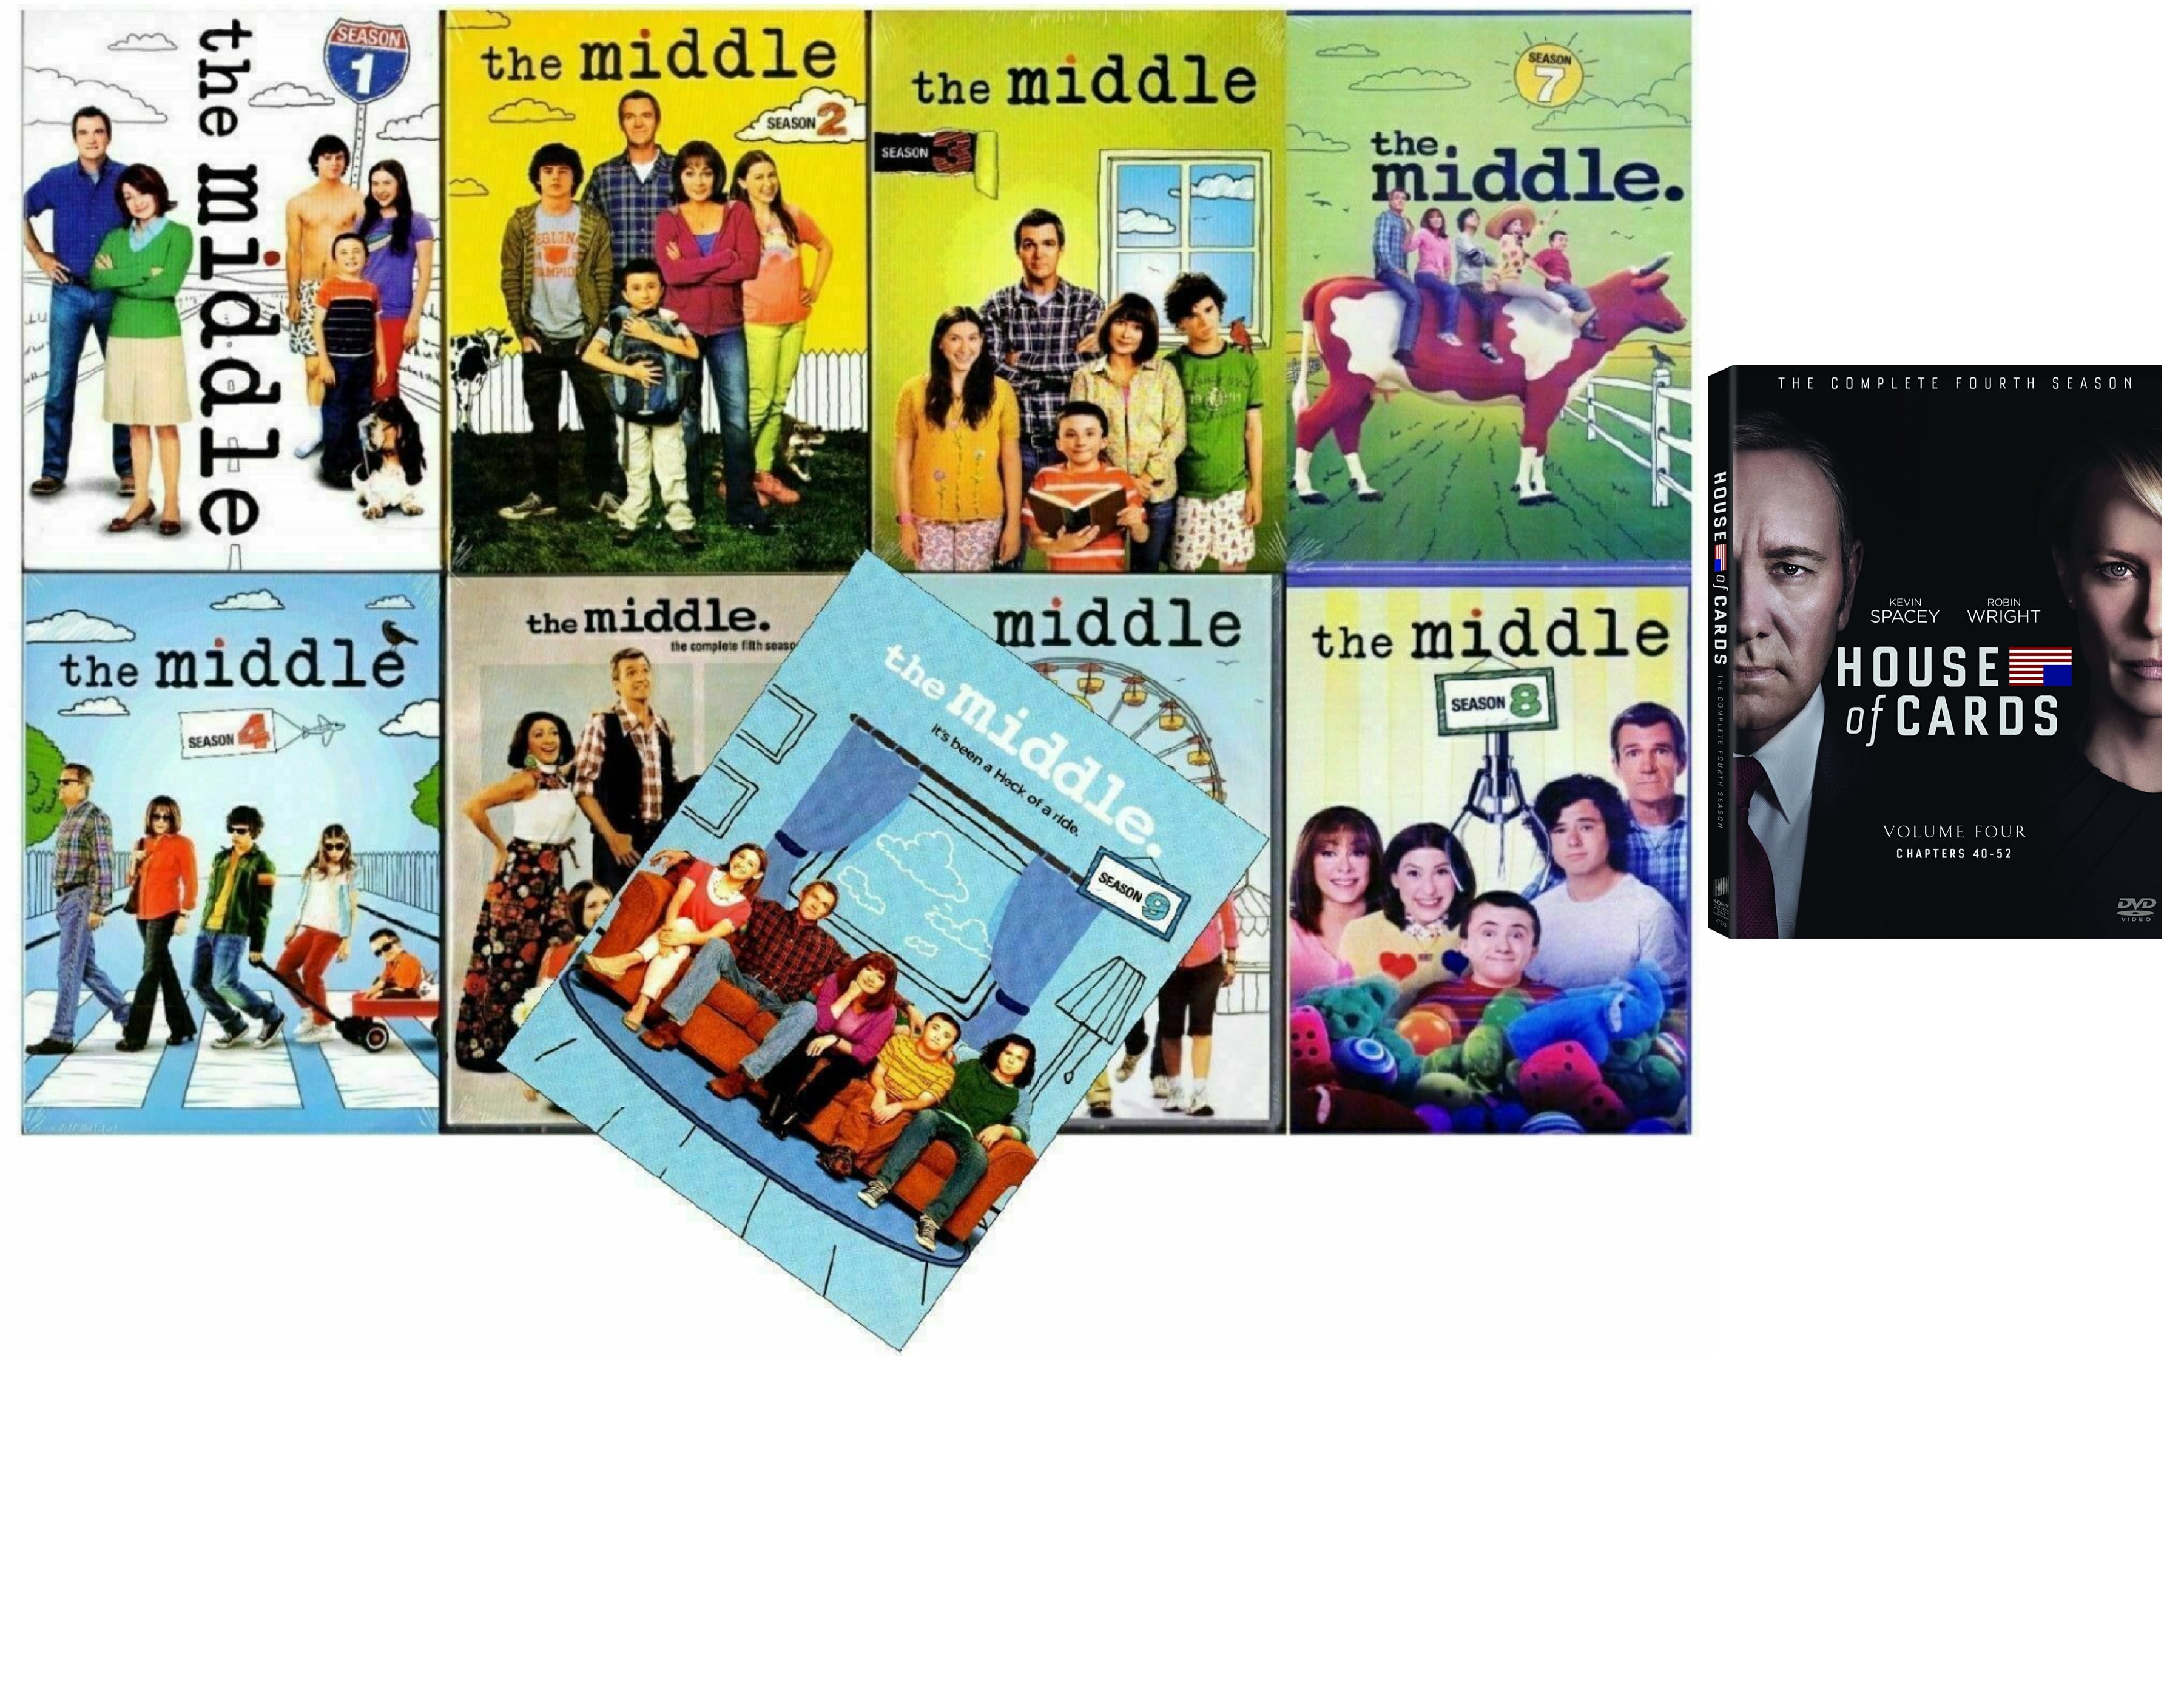 The Middle Complete Series Seasons 1-9 (DVD)